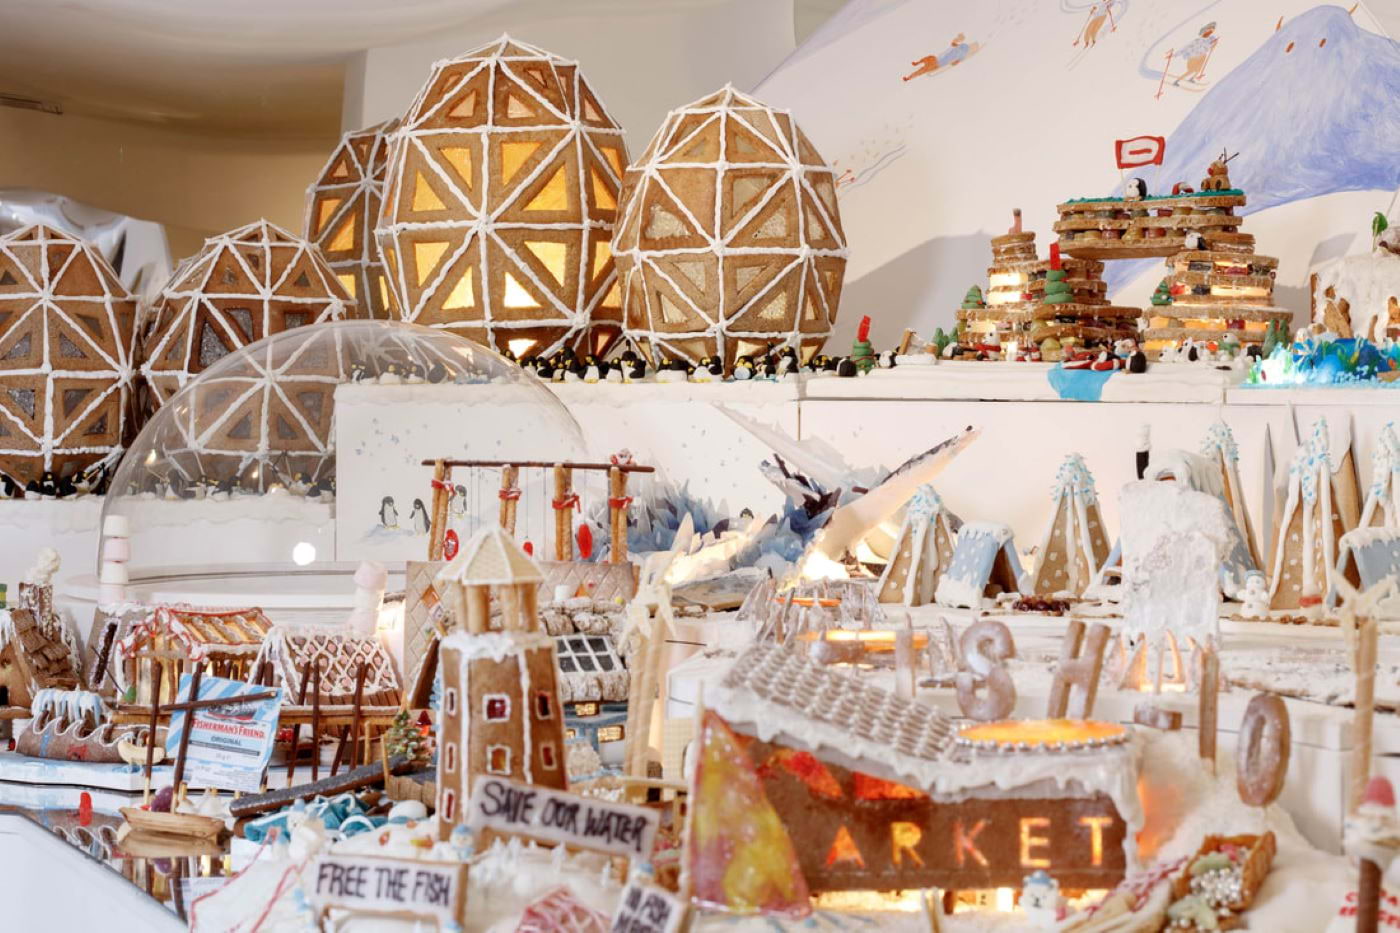 See the Gingerbread City exhibition at the Museum of Architecture